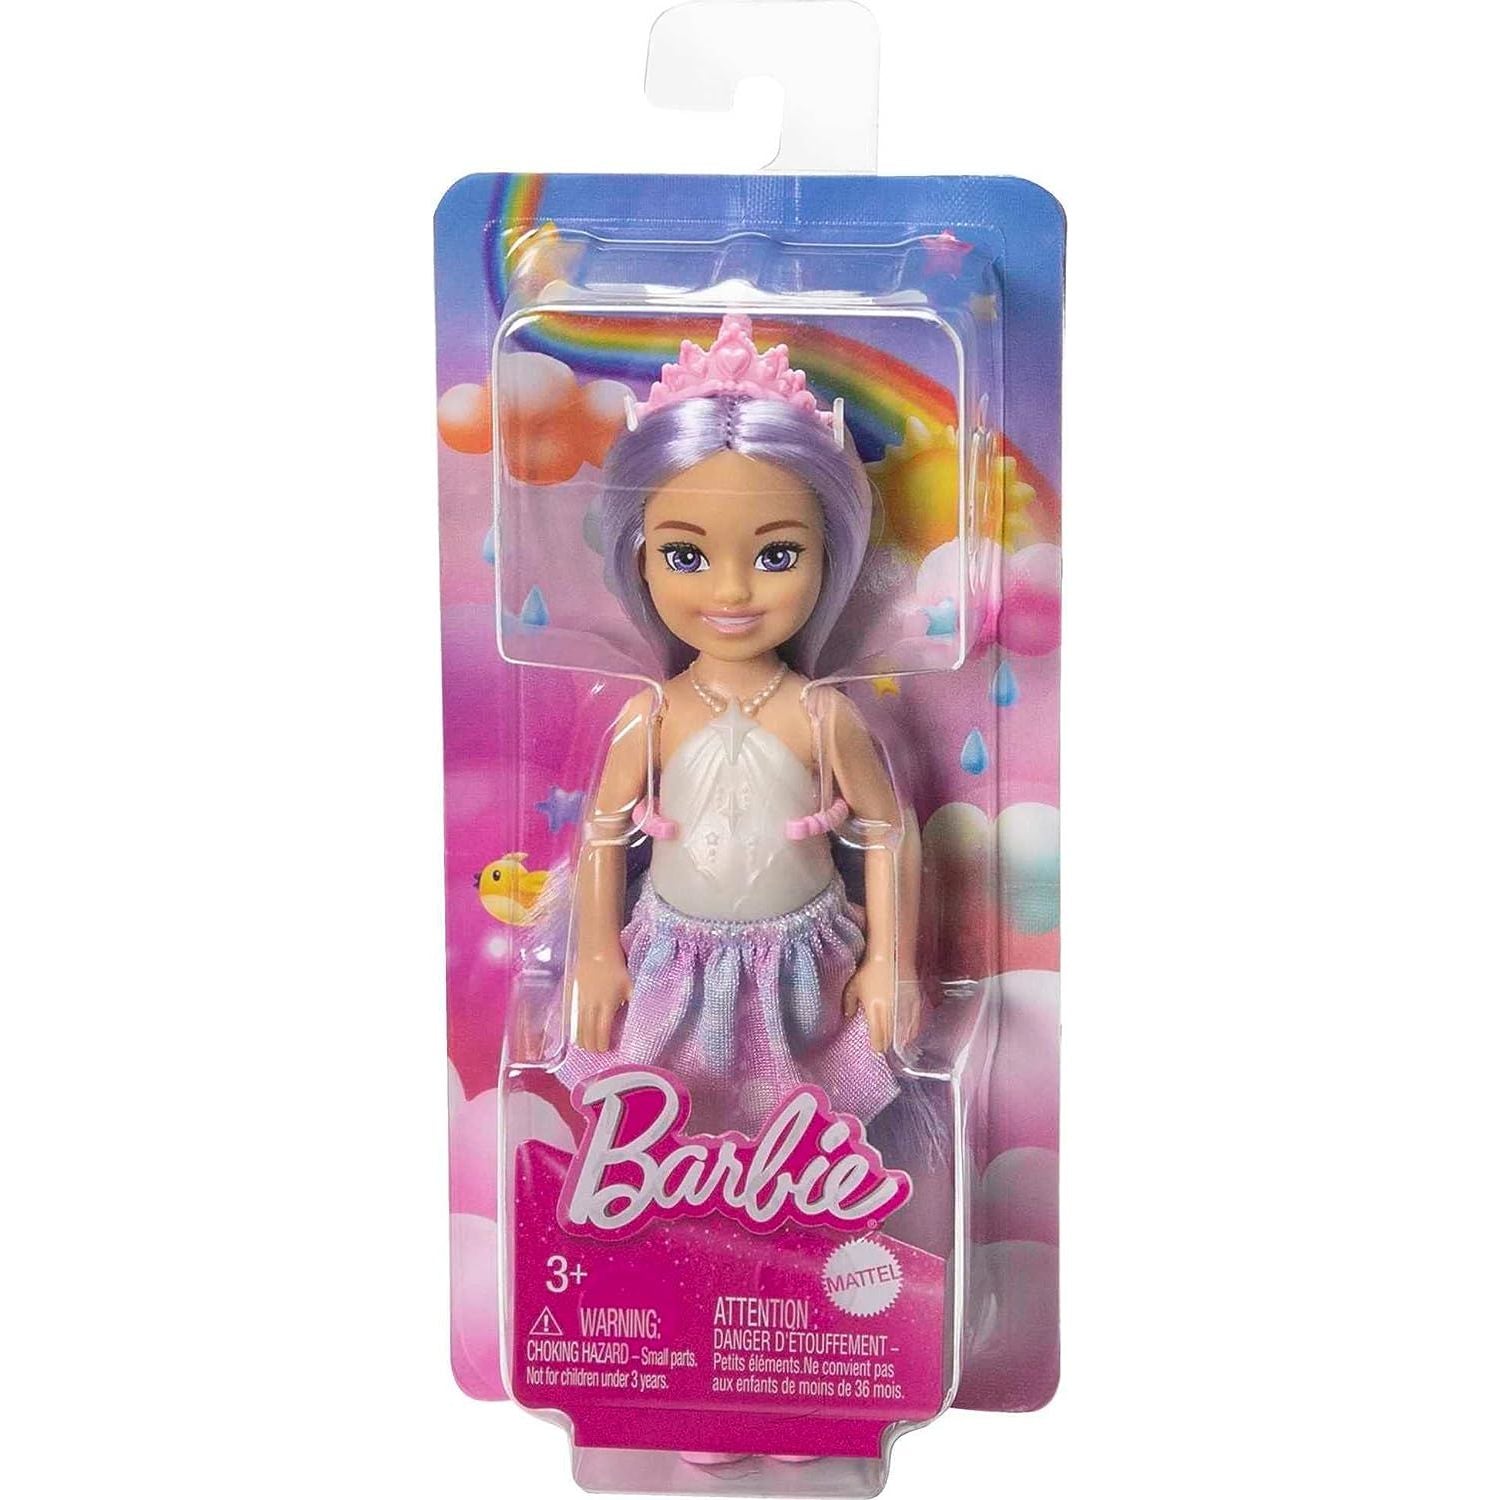 Barbie Unicorn-Inspired Chelsea Doll with Lavender Hair, Unicorn Toys, Horn Headband and Detachable Tail